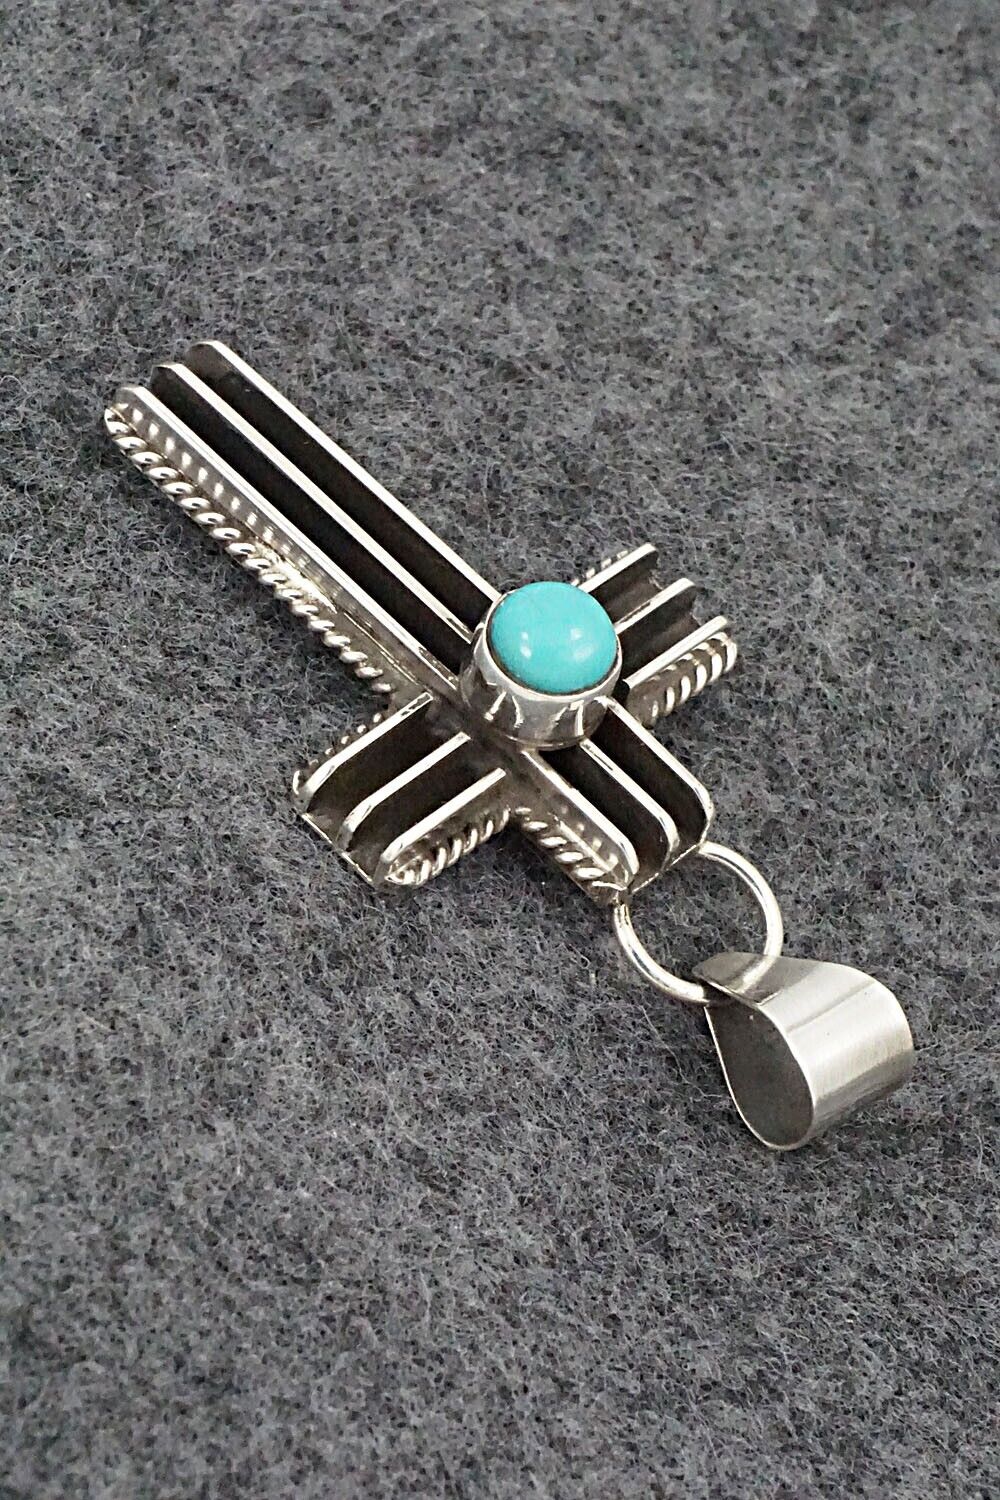 Turquoise & Sterling Silver Pendant - Darrell Yazzie